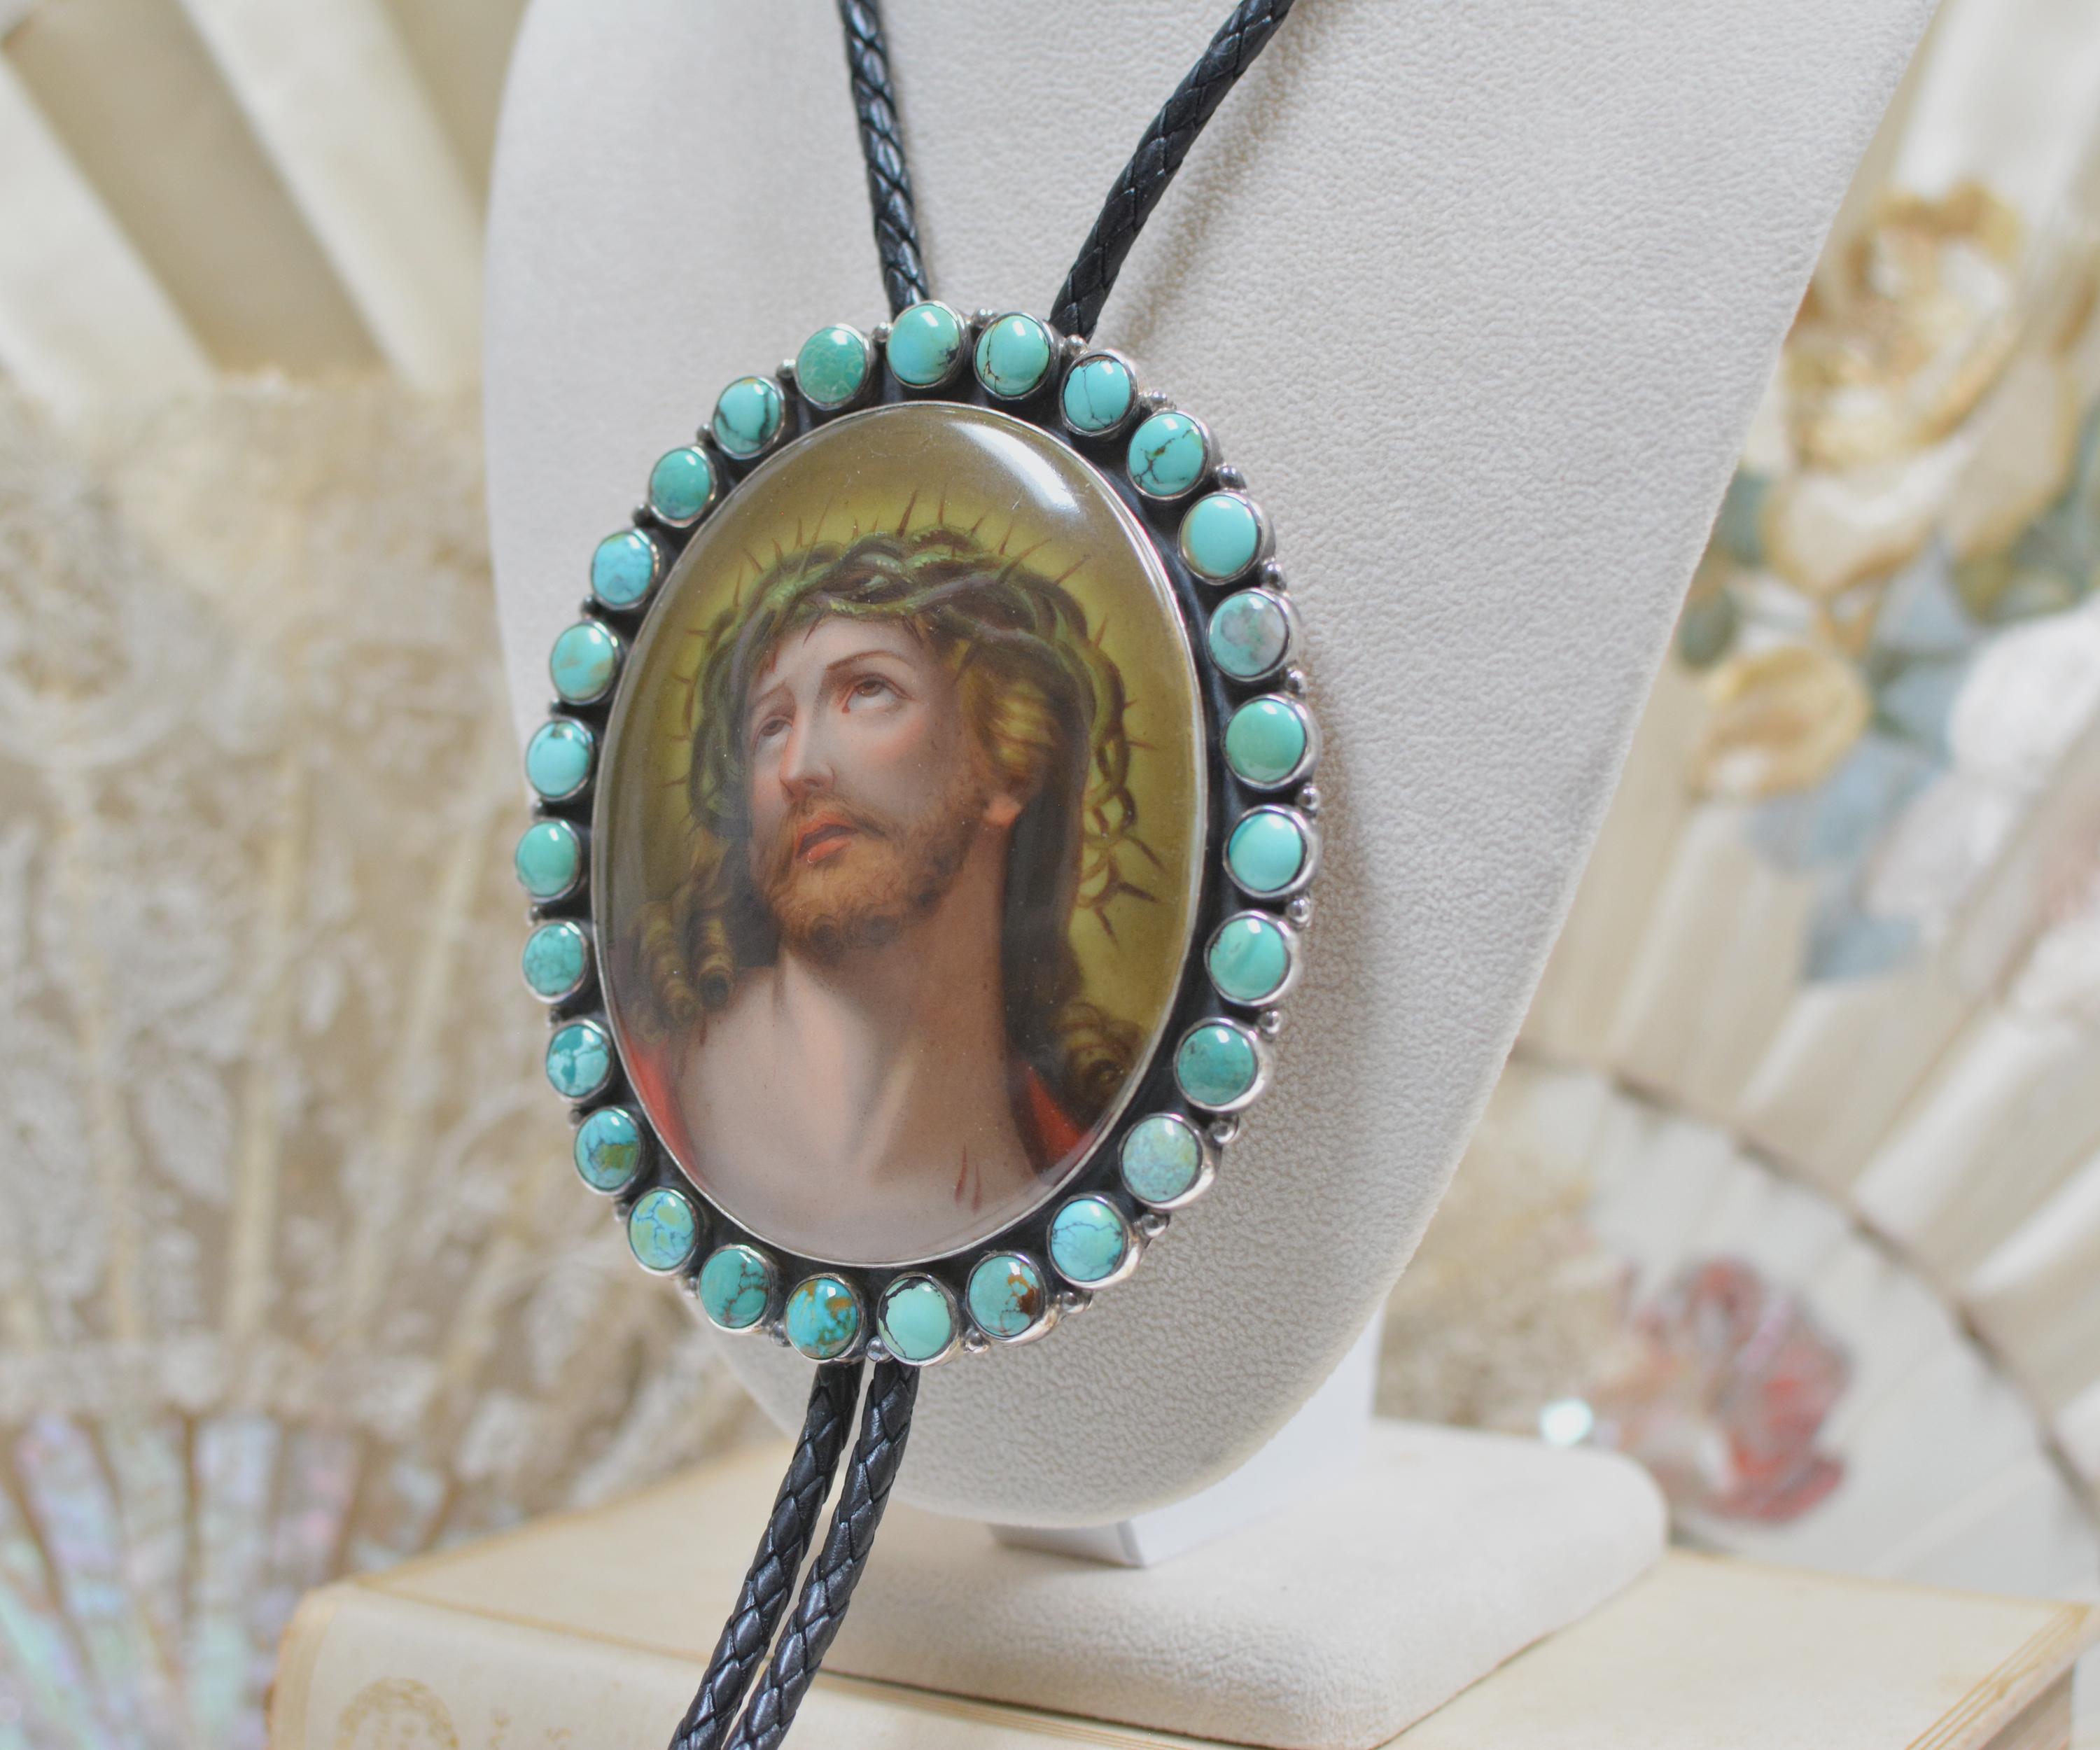 Baroque Jill Garber Nineteenth Century Porcelain Portrait of Christ Bolo with Turquoise For Sale